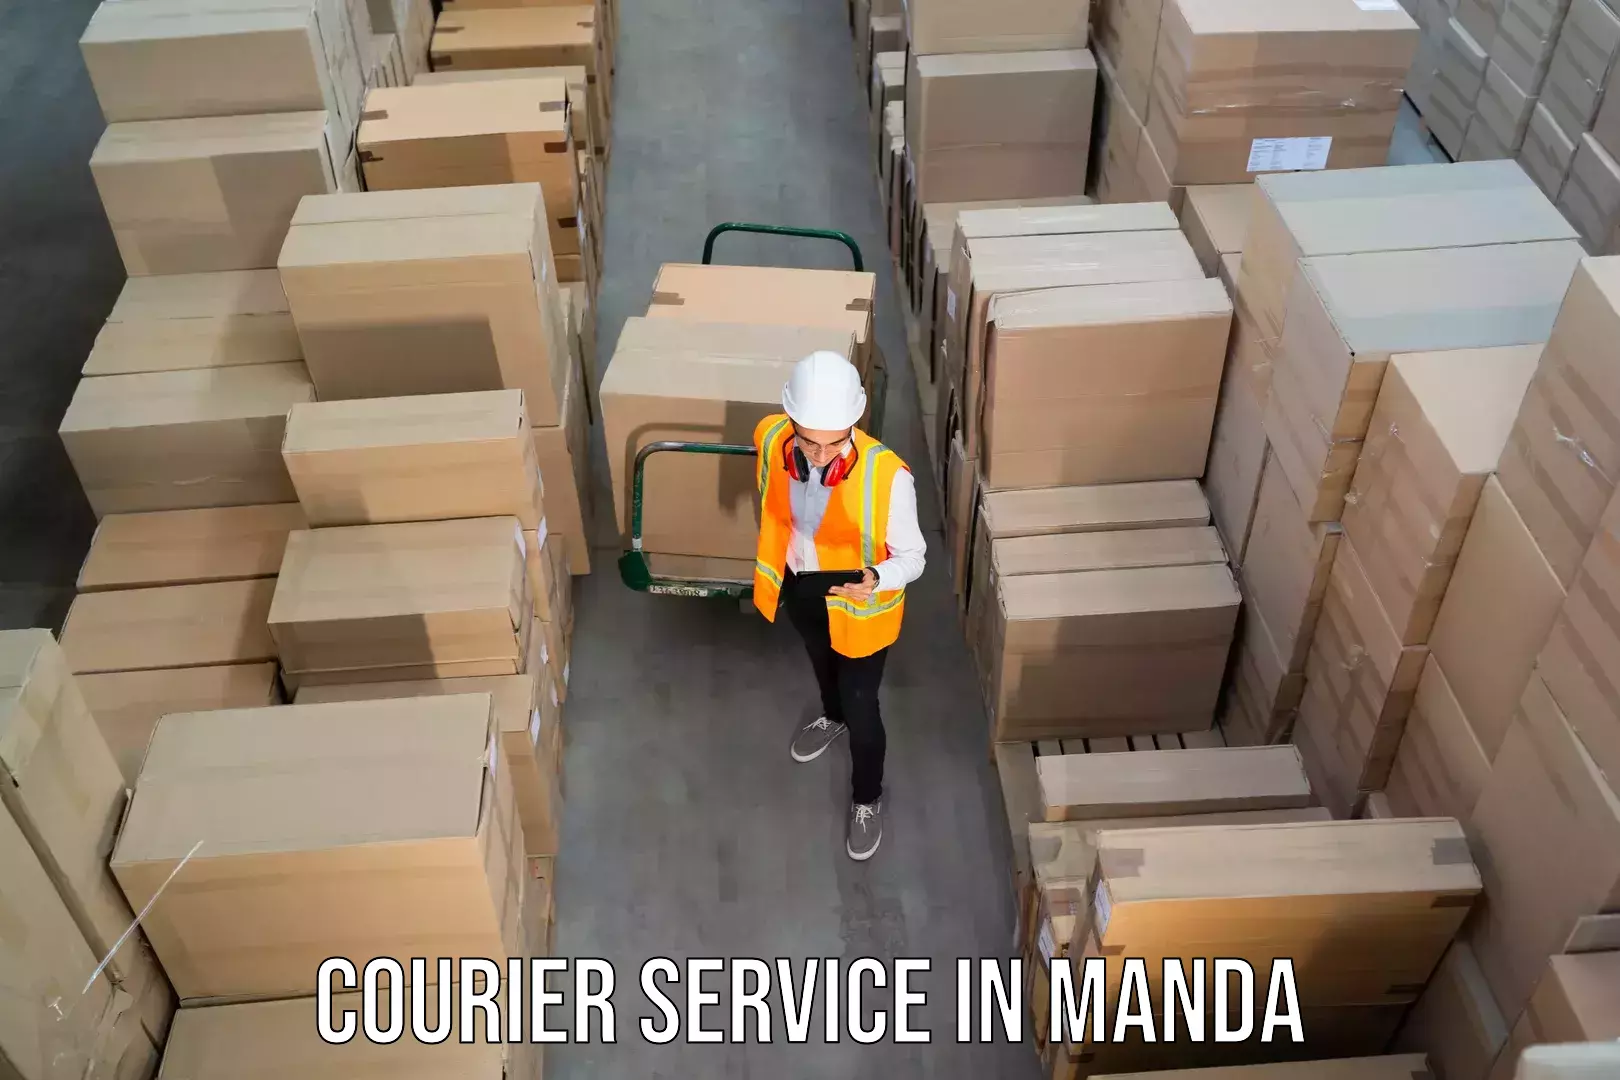 24-hour delivery options in Manda